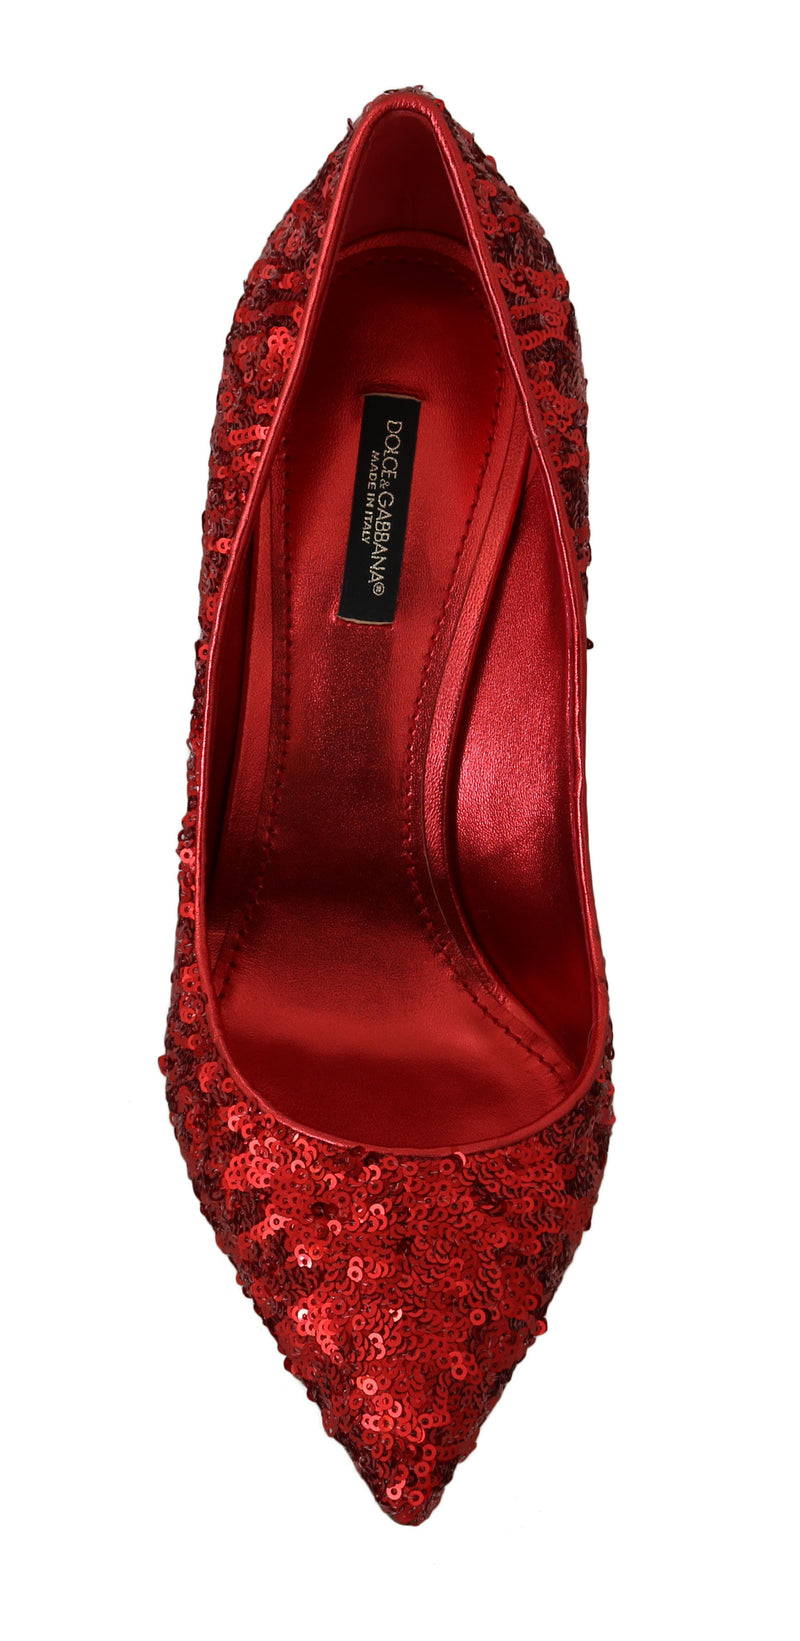 Red Sequined Leather Pumps Heels